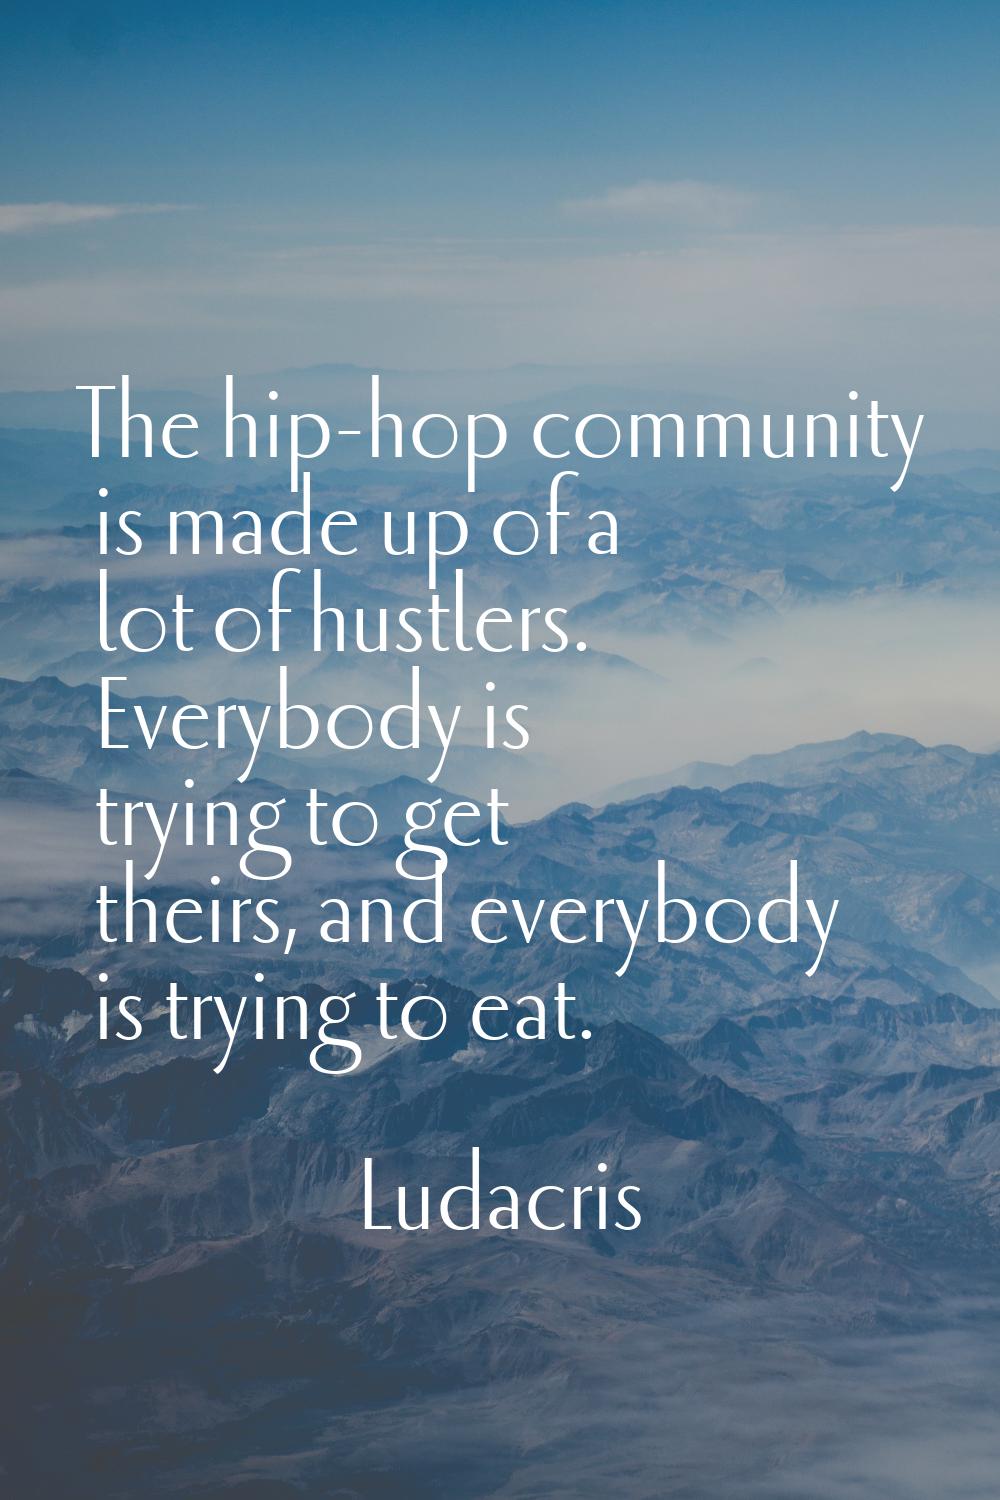 The hip-hop community is made up of a lot of hustlers. Everybody is trying to get theirs, and every